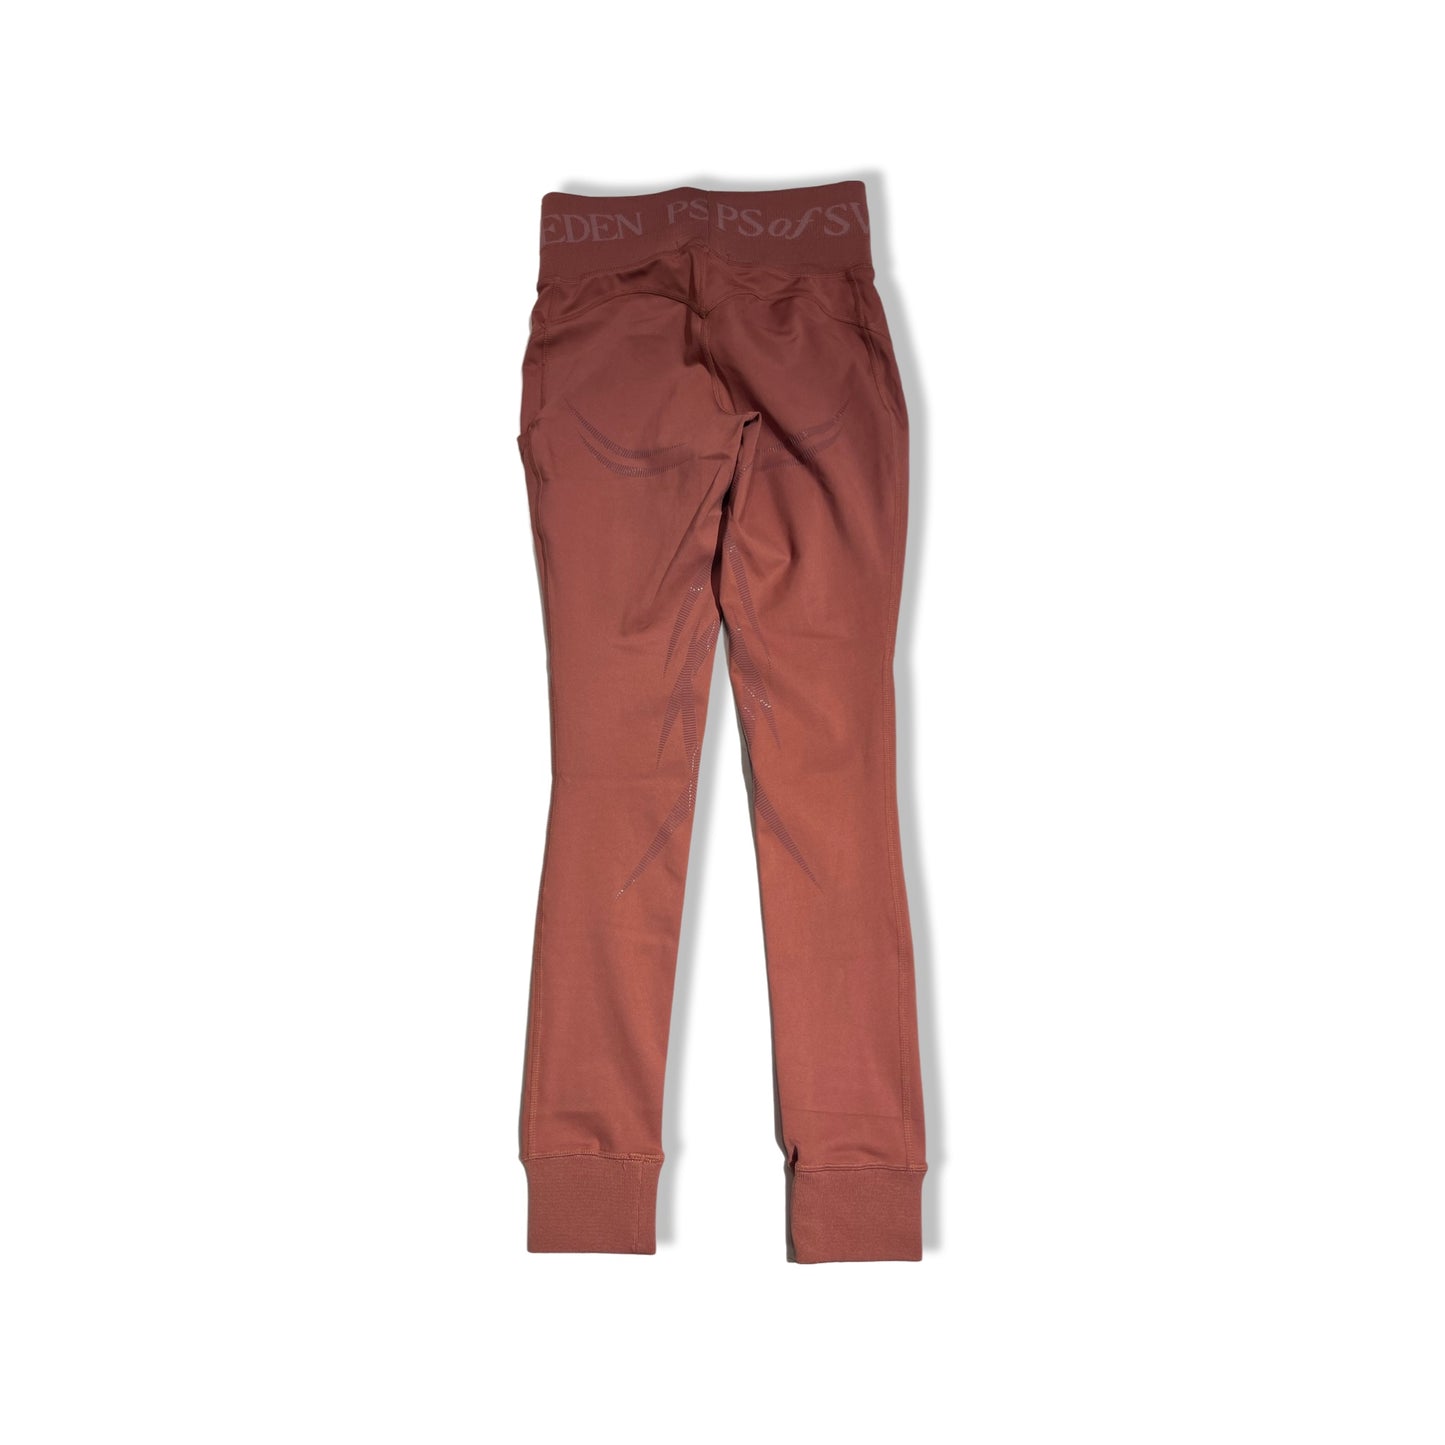 PS of Sweden Tanya Riding Breeches Ladies S